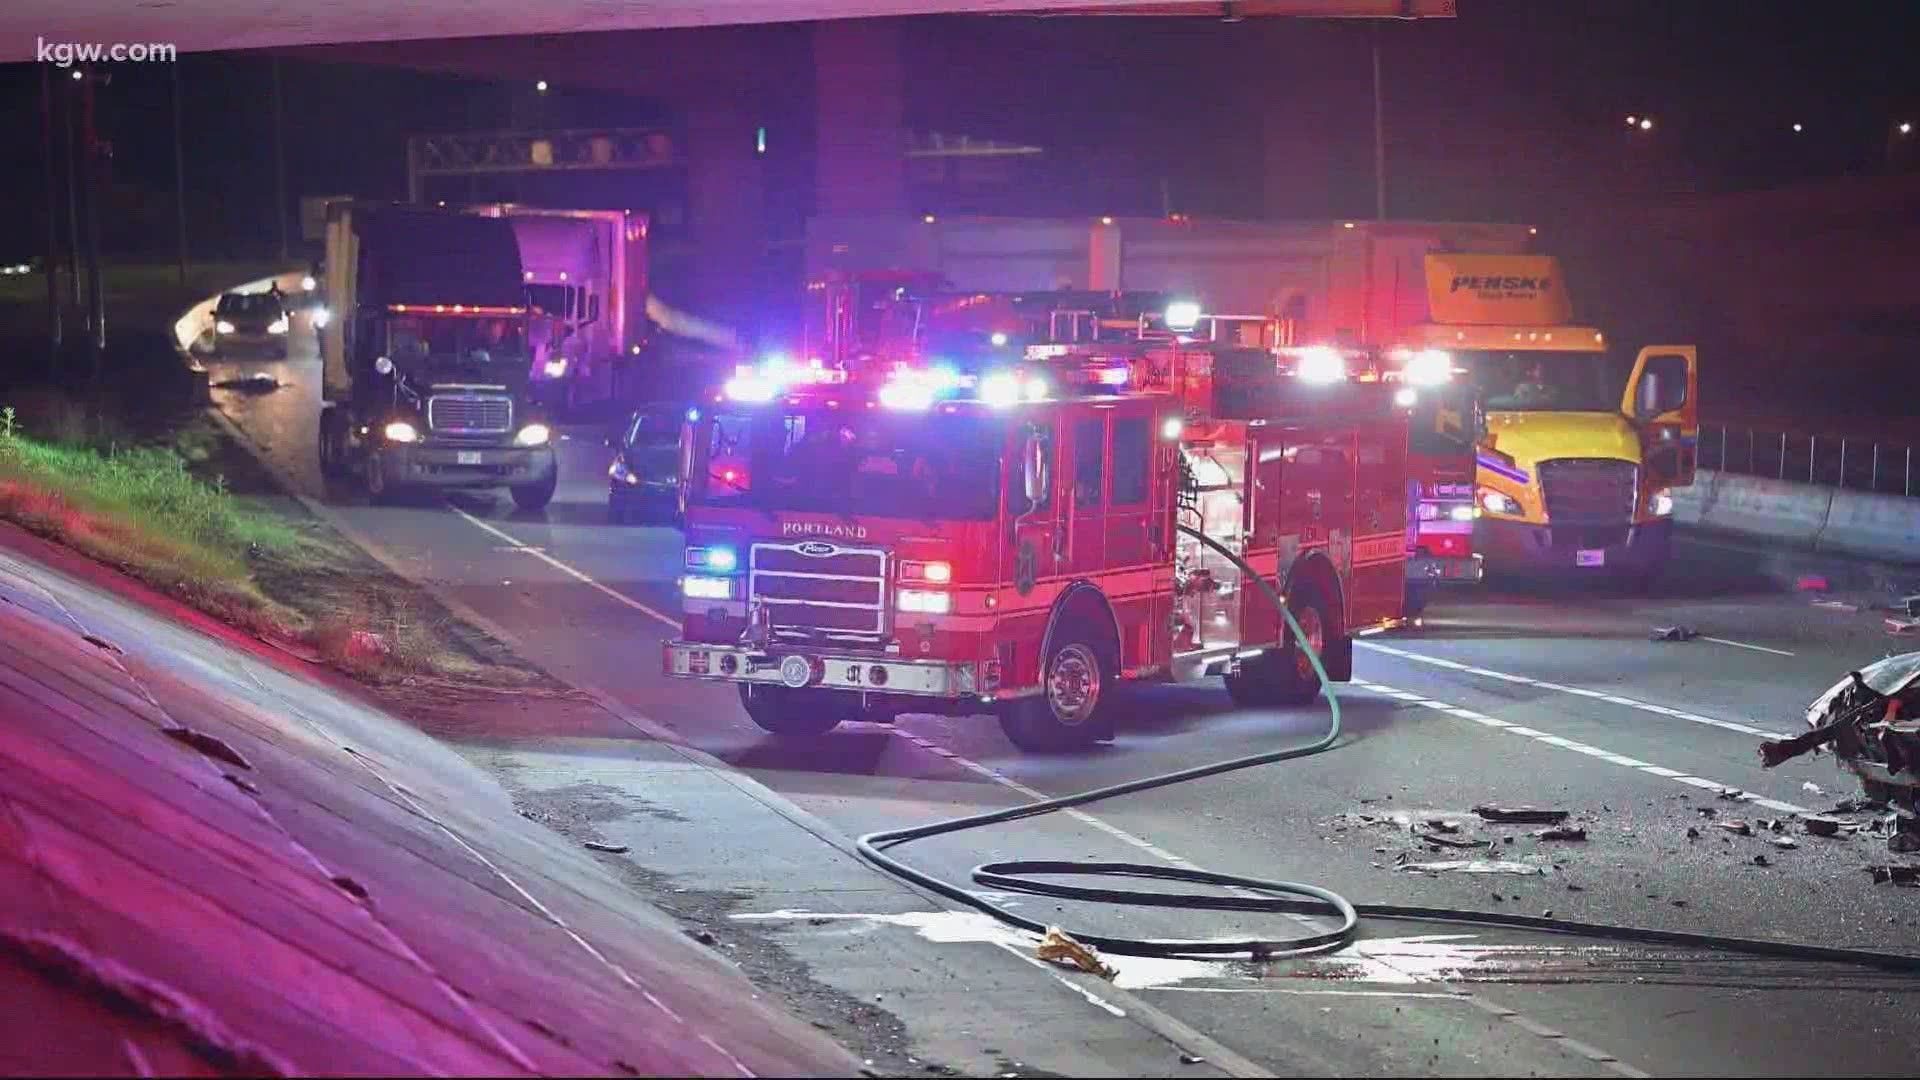 A crash involving a wrong-way driver on Interstate 84 near Northeast Halsey Street shut down all eastbound lanes of the freeway in the area.